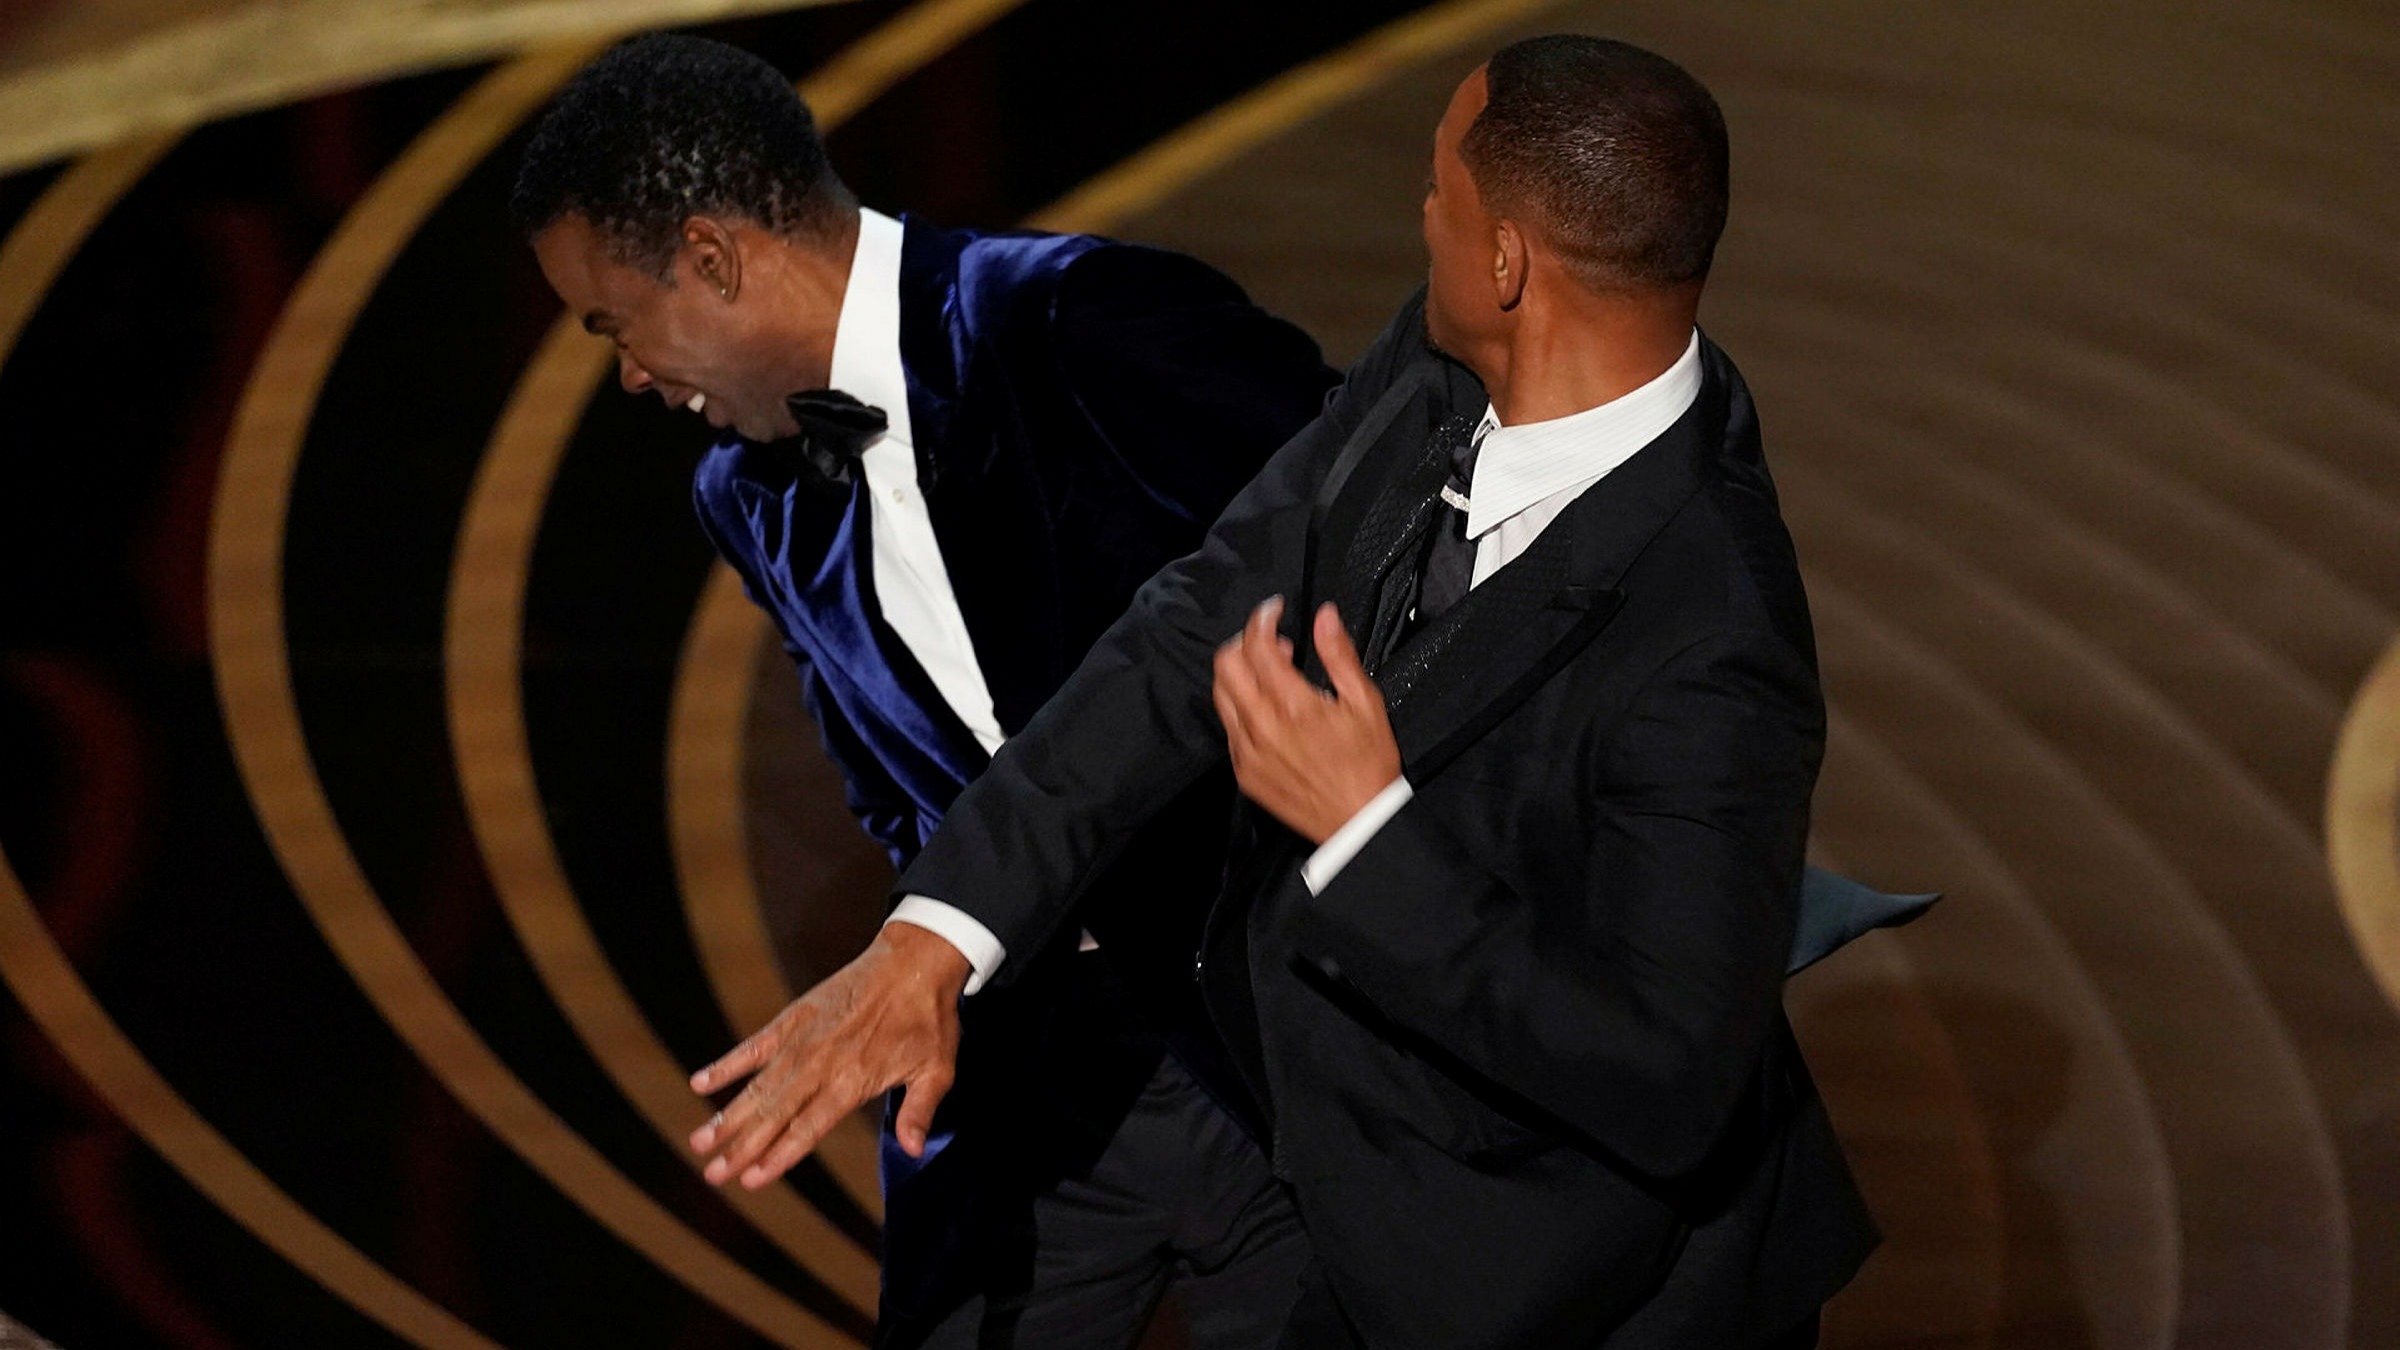 The infamous Chris Rock and Will Smith 'slap' incident